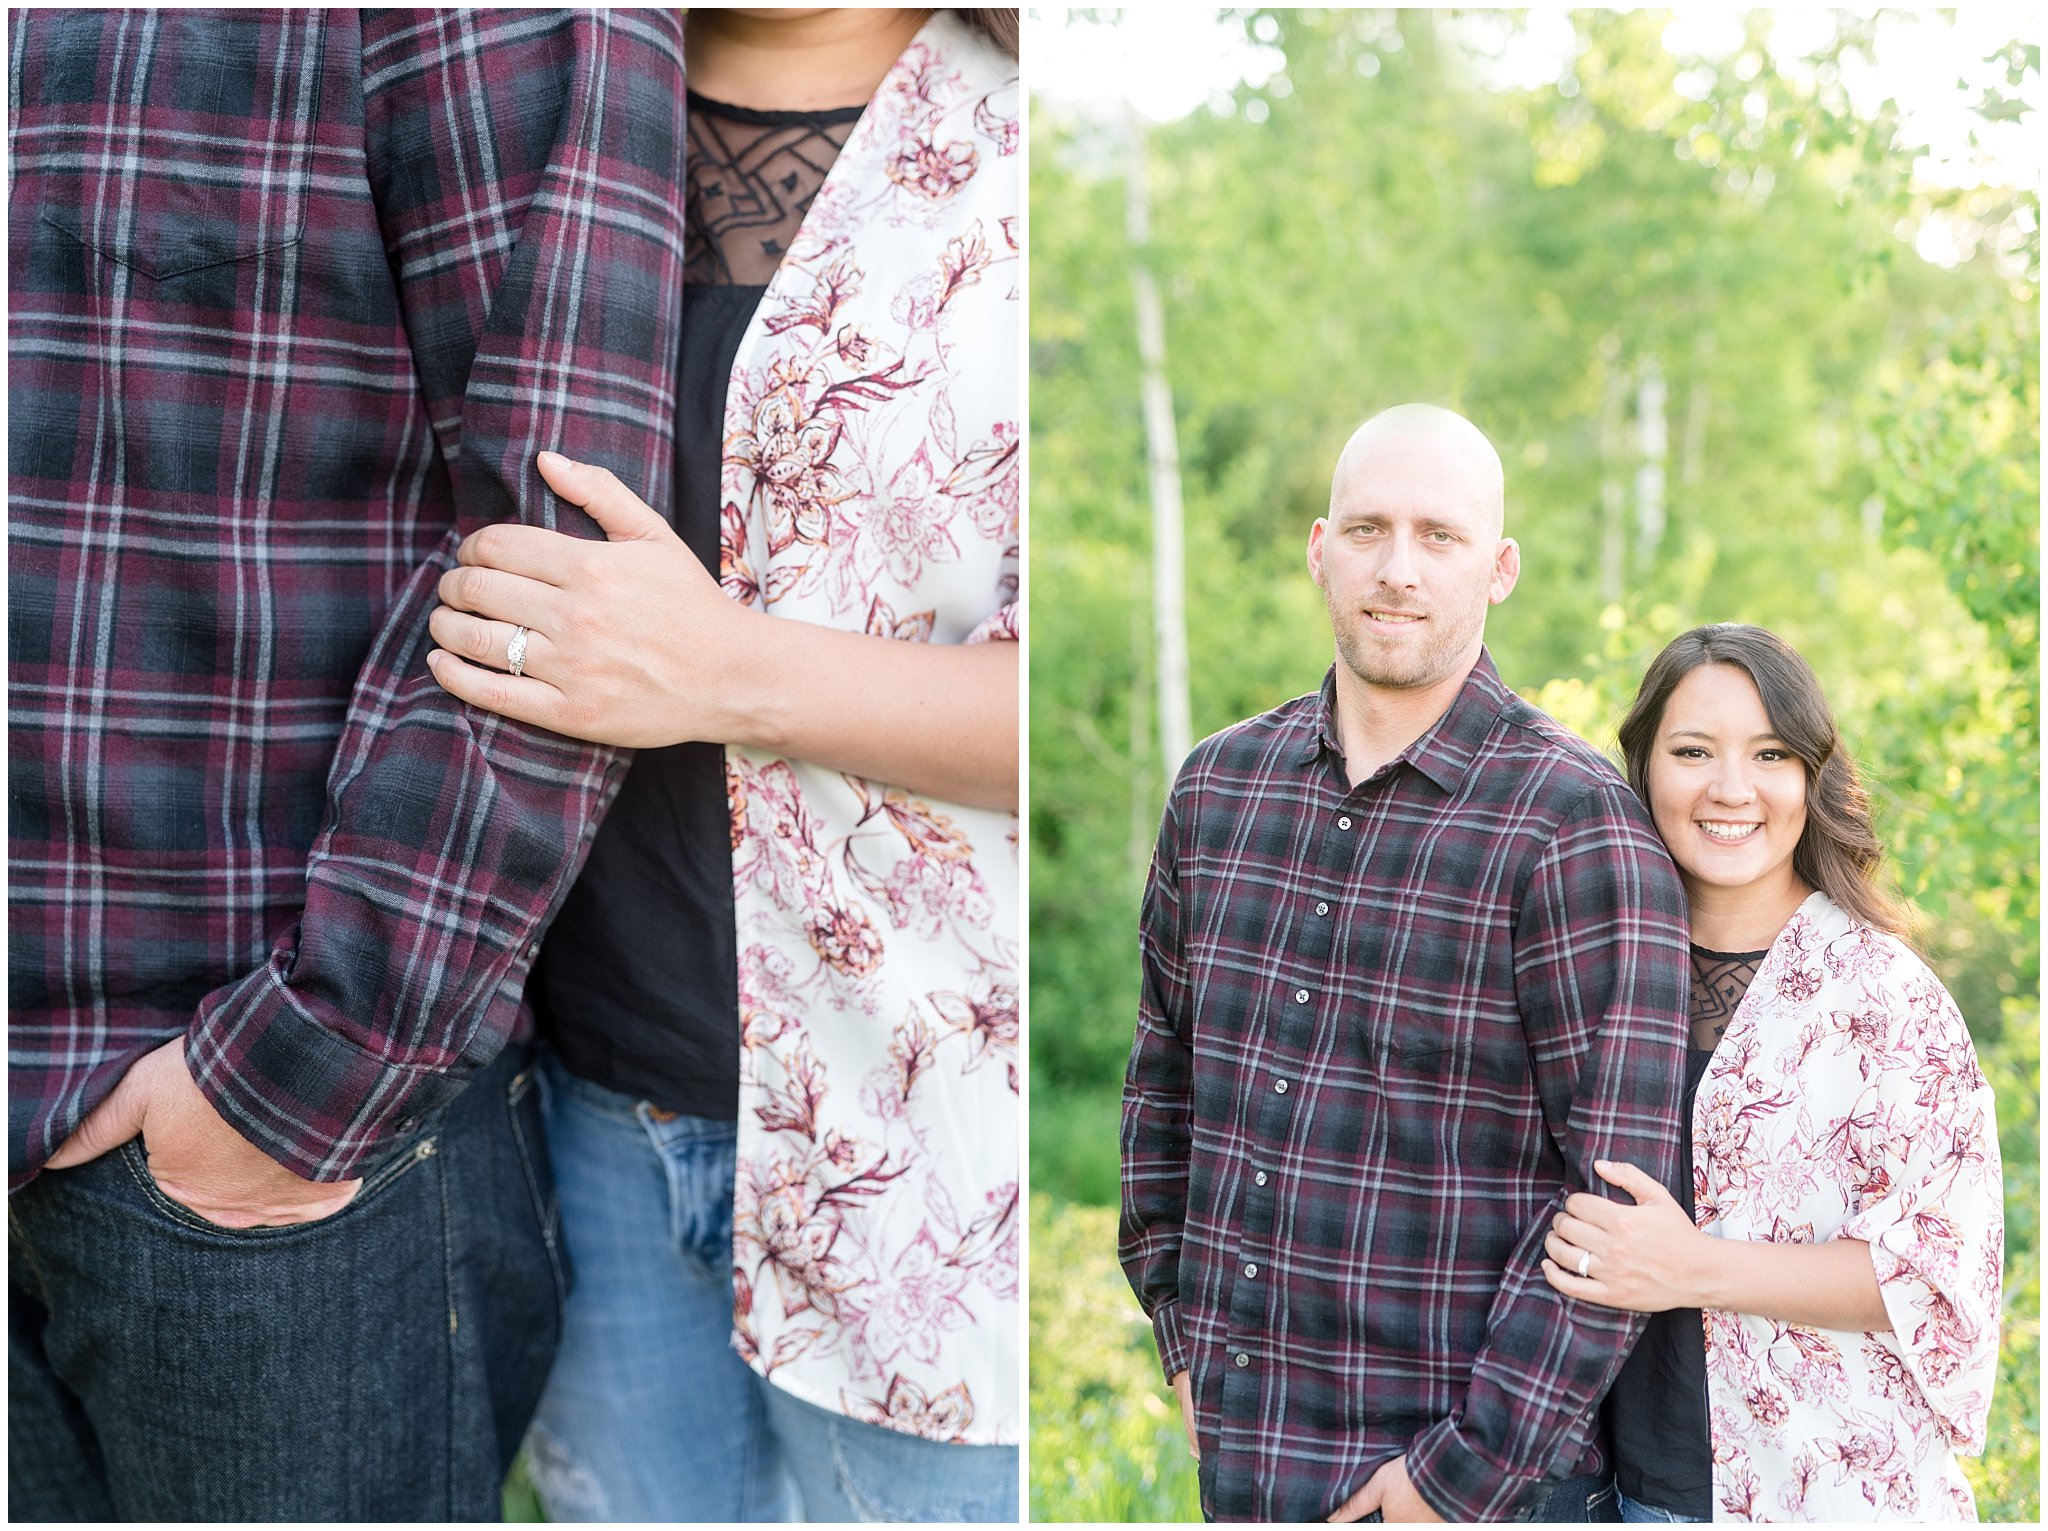 Couple and details in the Aspen Trees and wildflowers during engagement session | Snowbasin Utah Engagements